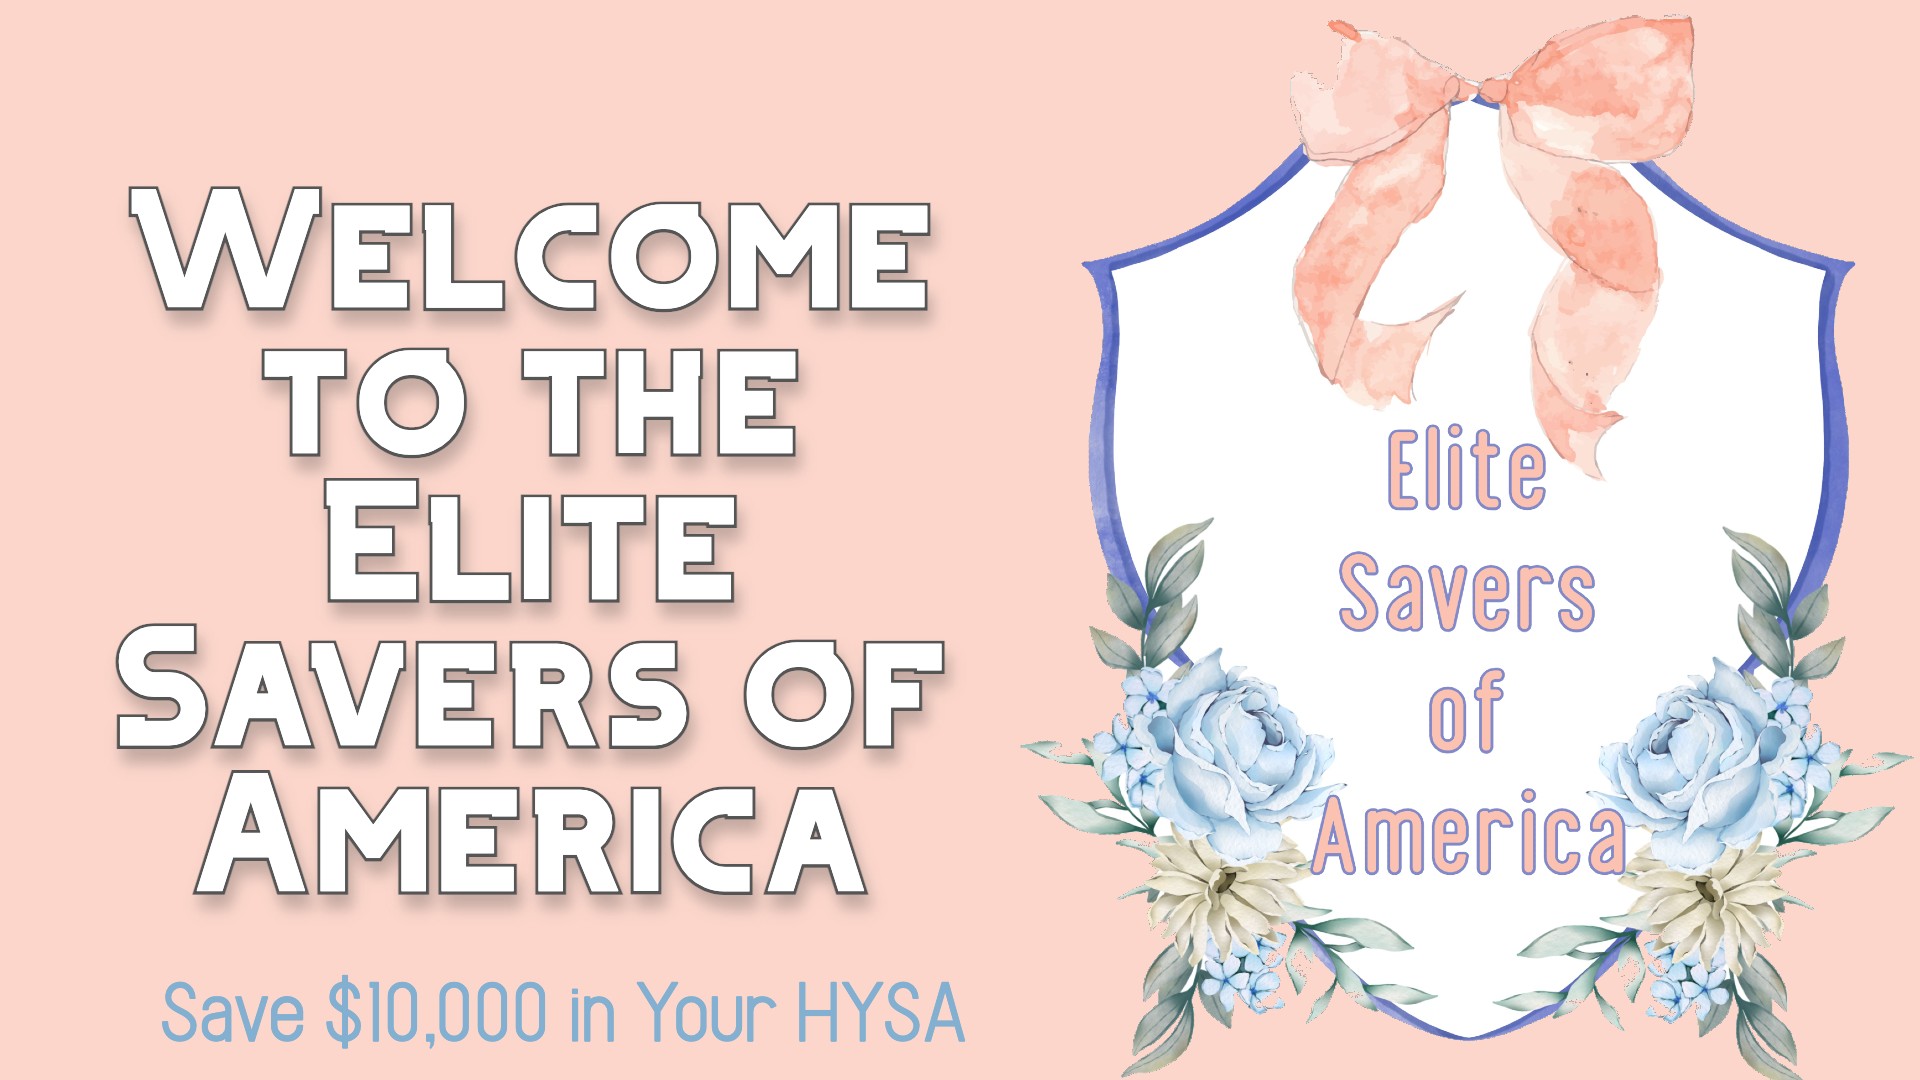 Welcome to the Elite Savers of America